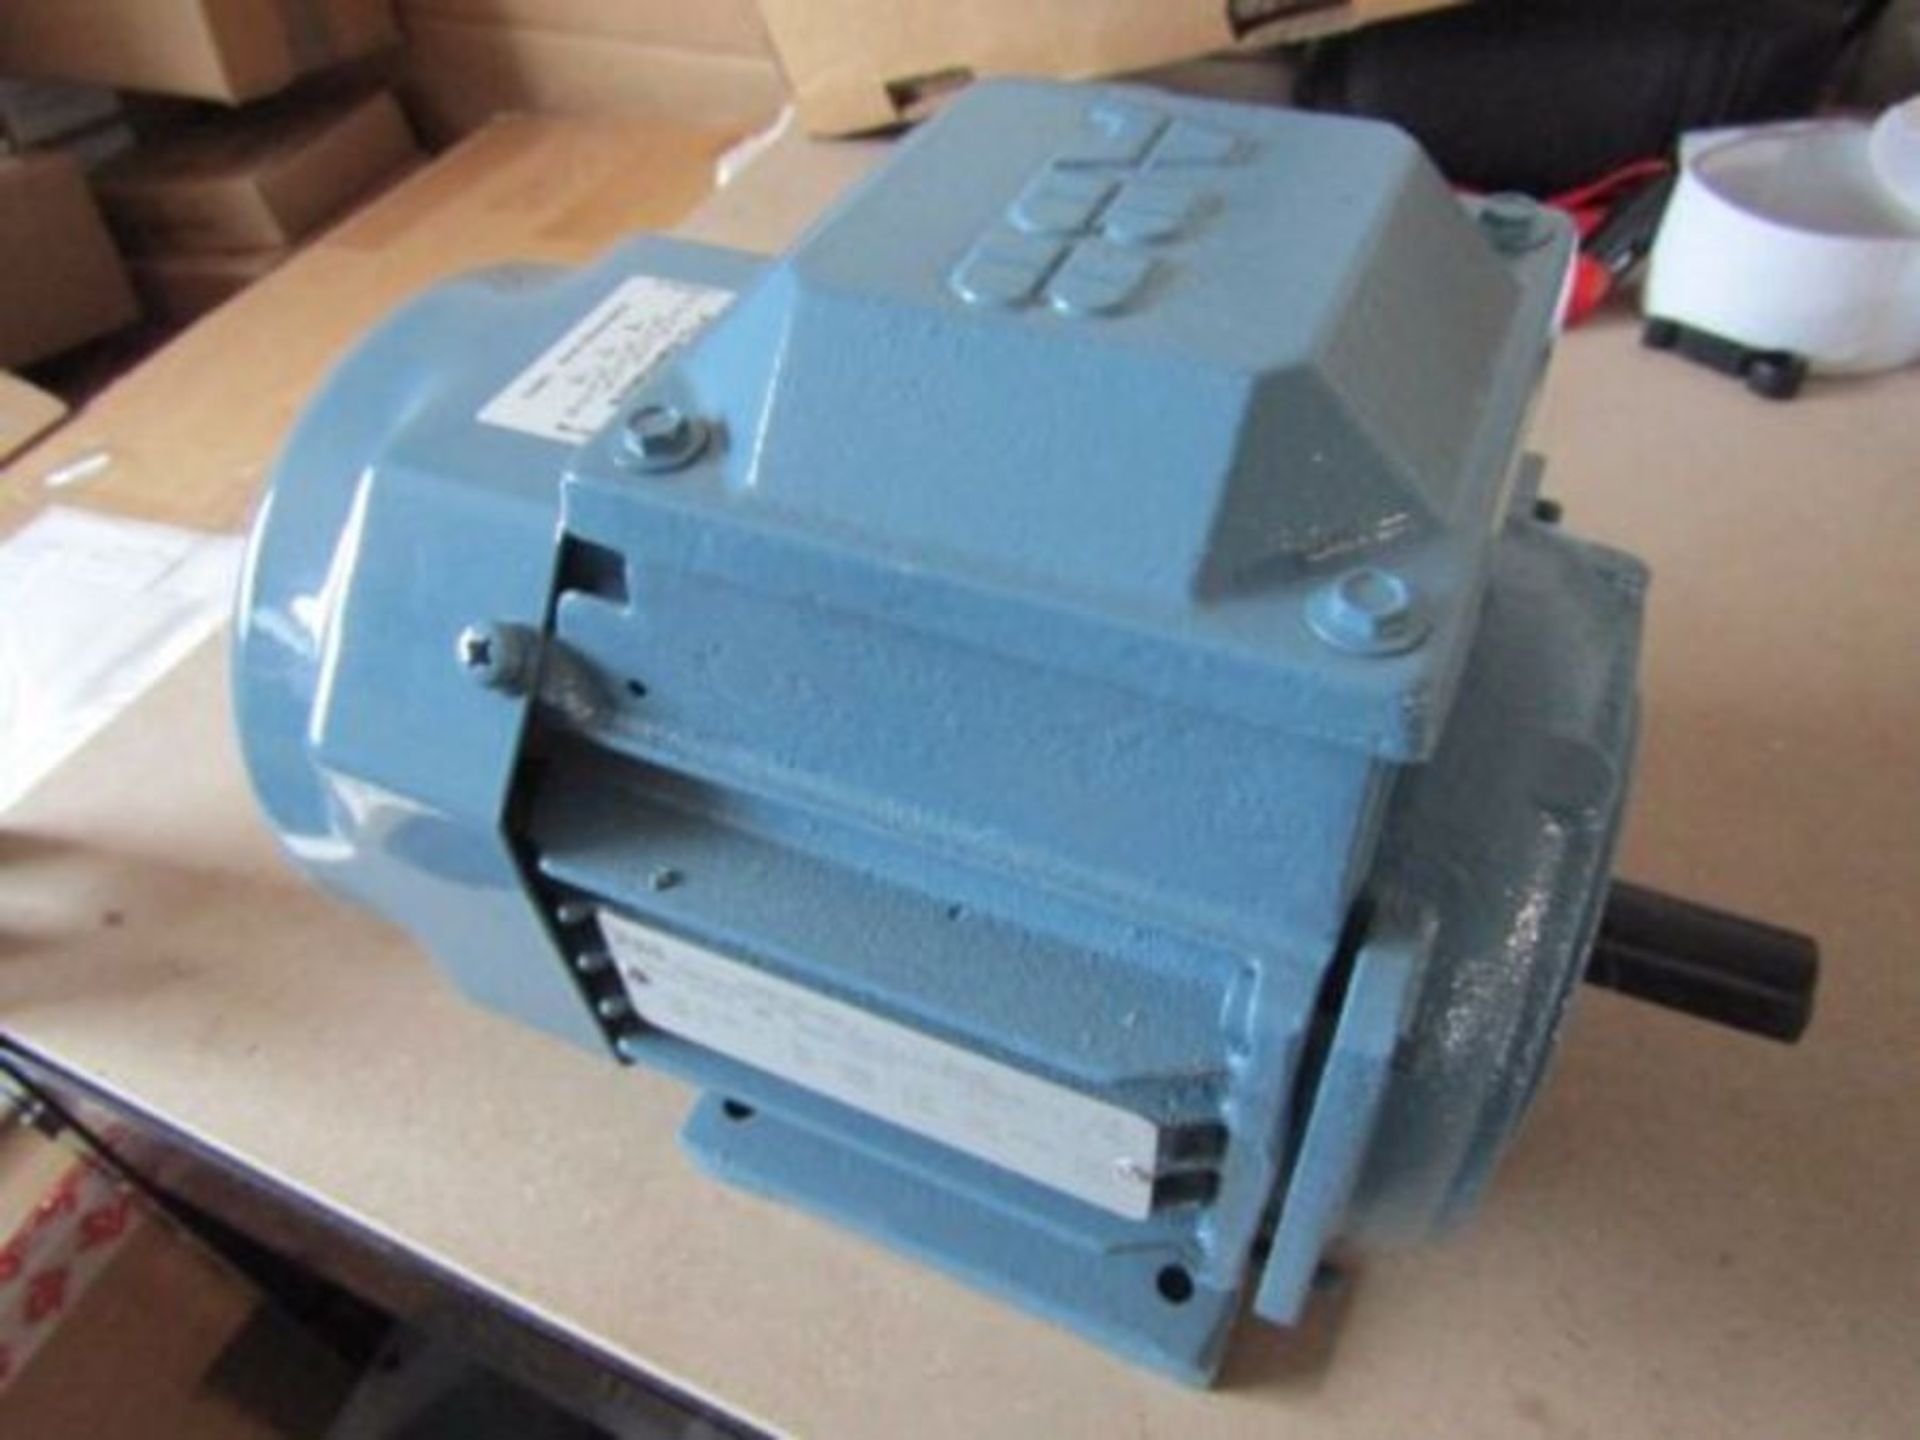 5 x ABB 3ph 2P induction motors - £900 cost price in total